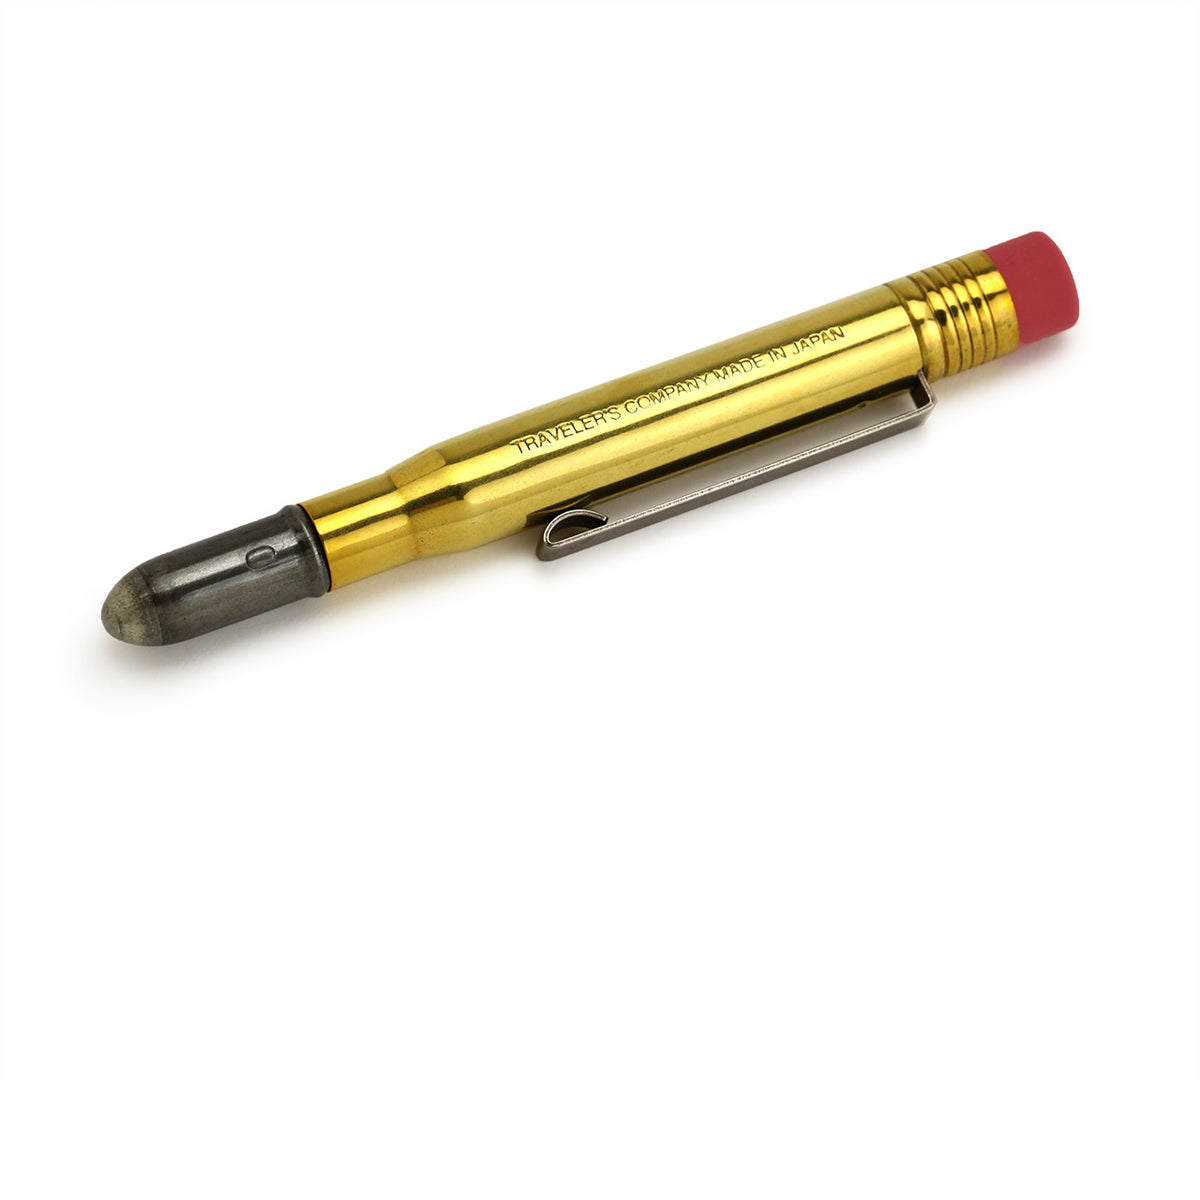 compact brass pencil with gray metal cap and pink eraser